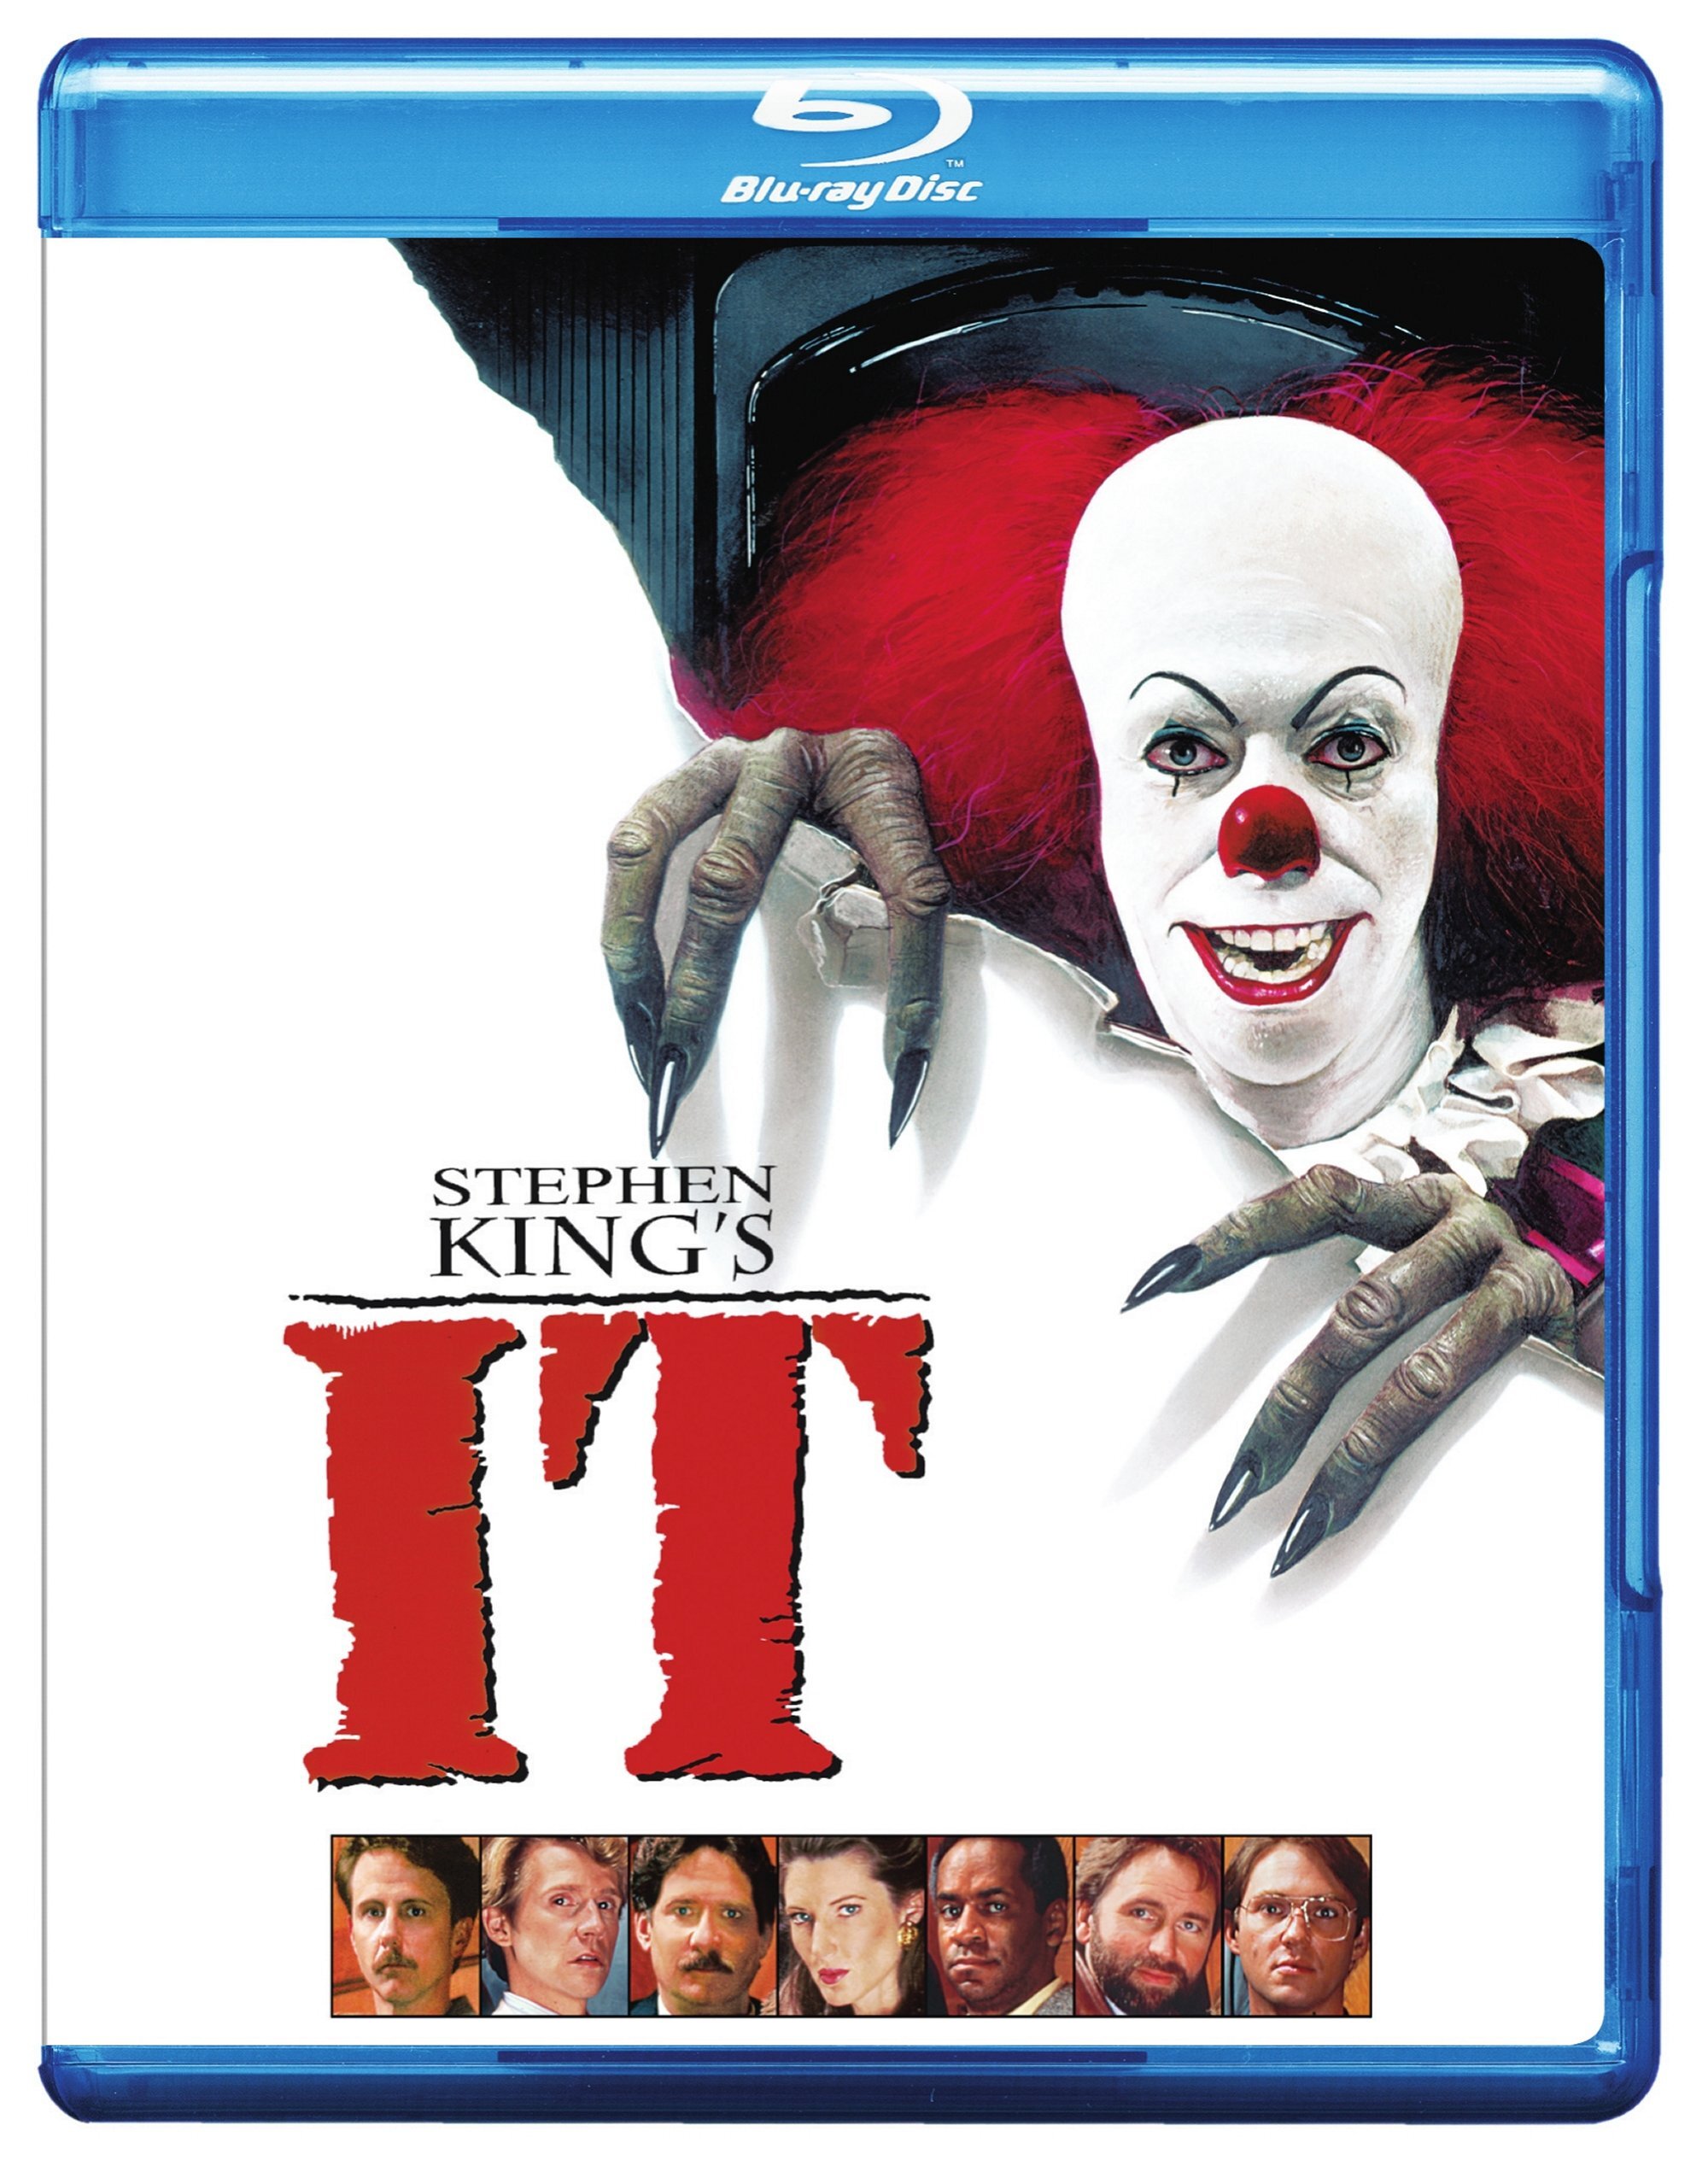 Stephen King's It - Blu-ray [ 1990 ]  - Drama Television On Blu-ray - TV Shows On GRUV